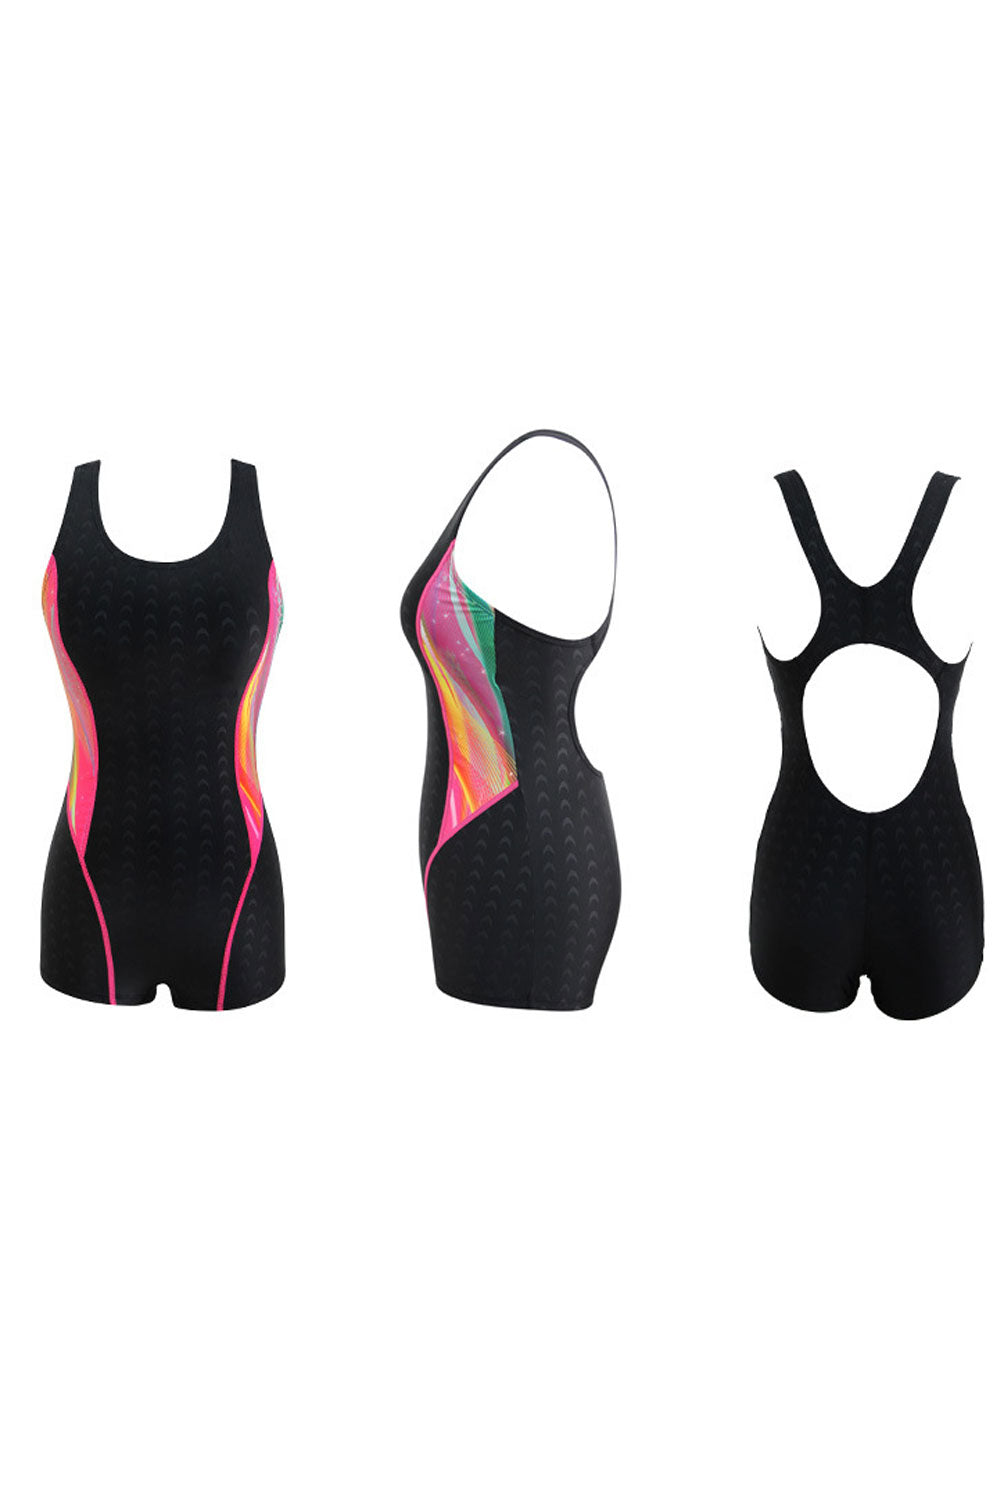 New water-repellent quick-drying imitation sharkskin women's boxer sports professional one-piece swimsuit with removable chest pad